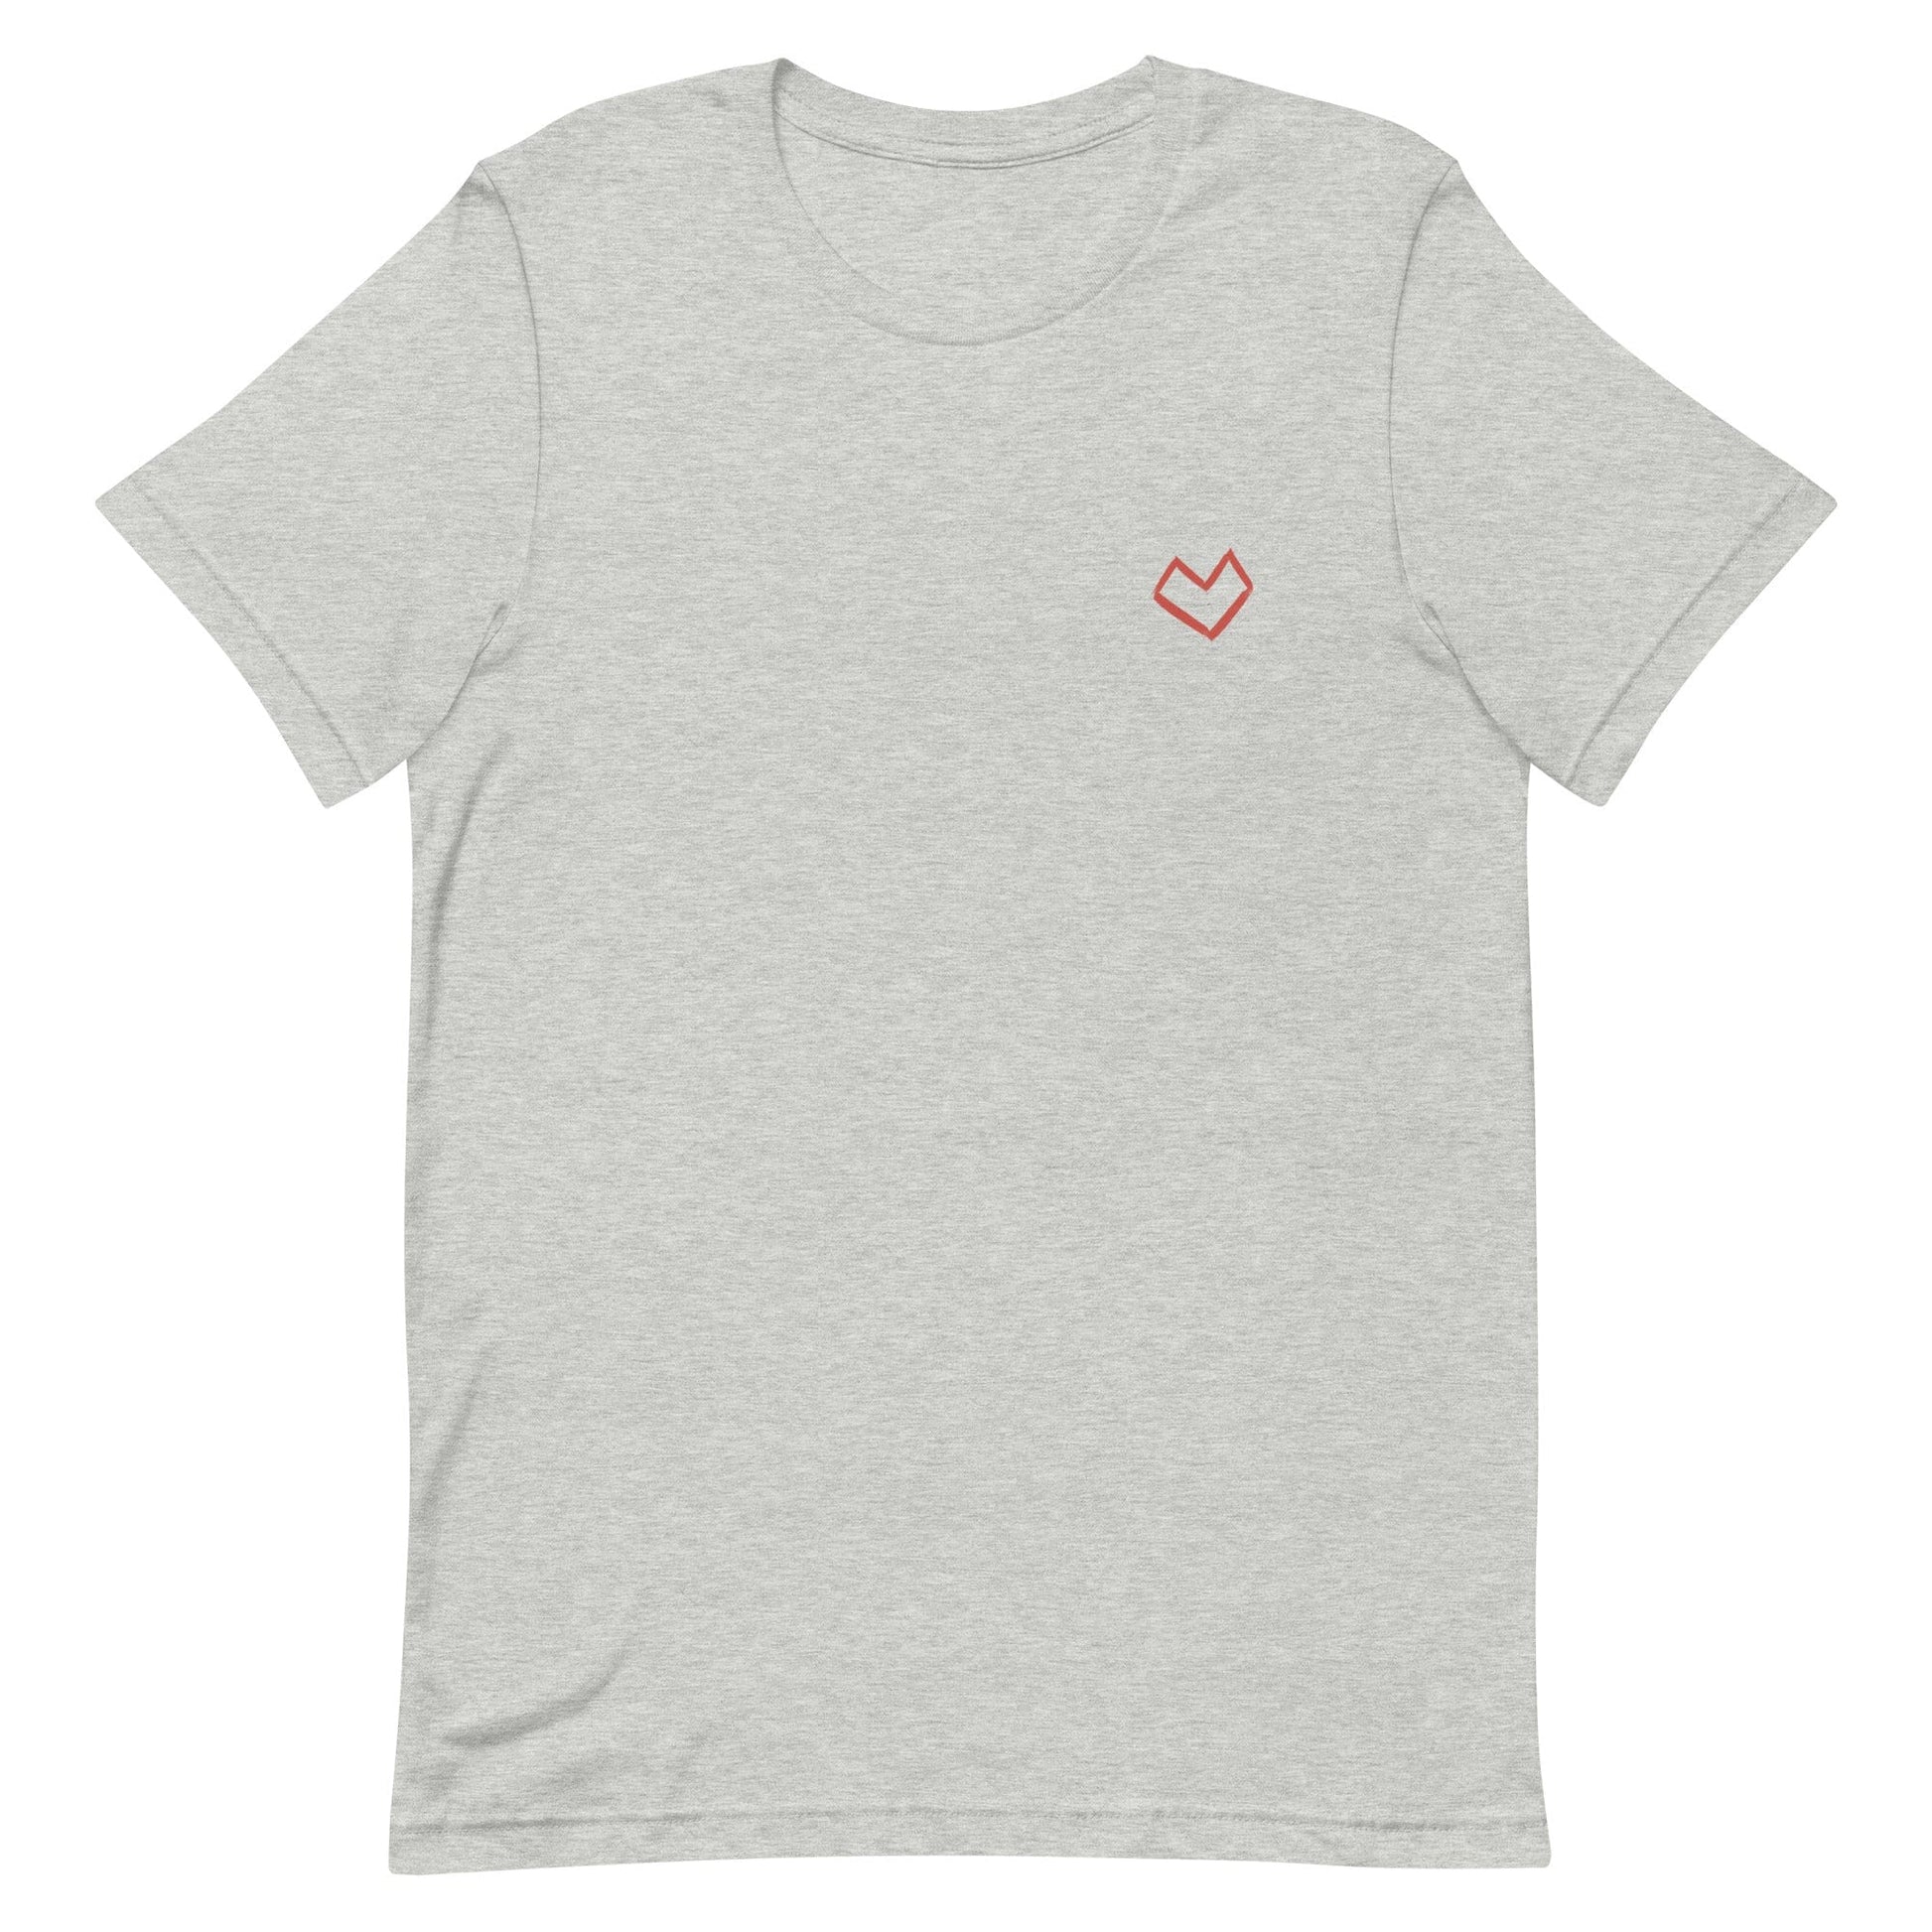 she-is-someone-feminist-t-shirt-grey-at-feminist-define-front